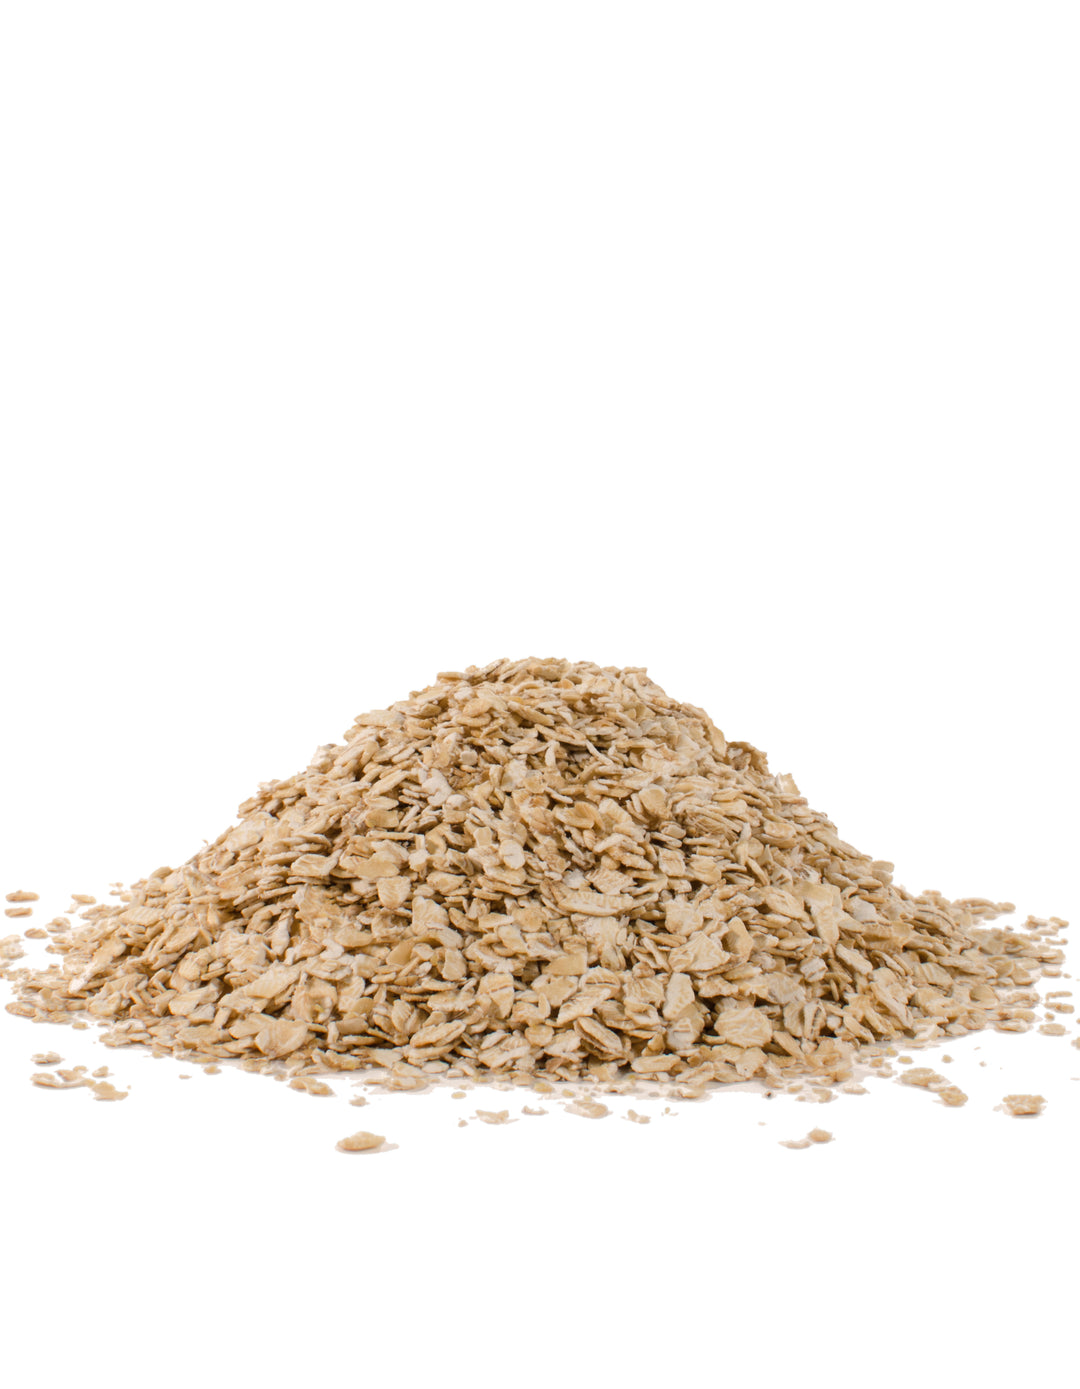 Bob's Red Mill Natural Foods Inc Gluten Free Rolled Oats-25 lb.